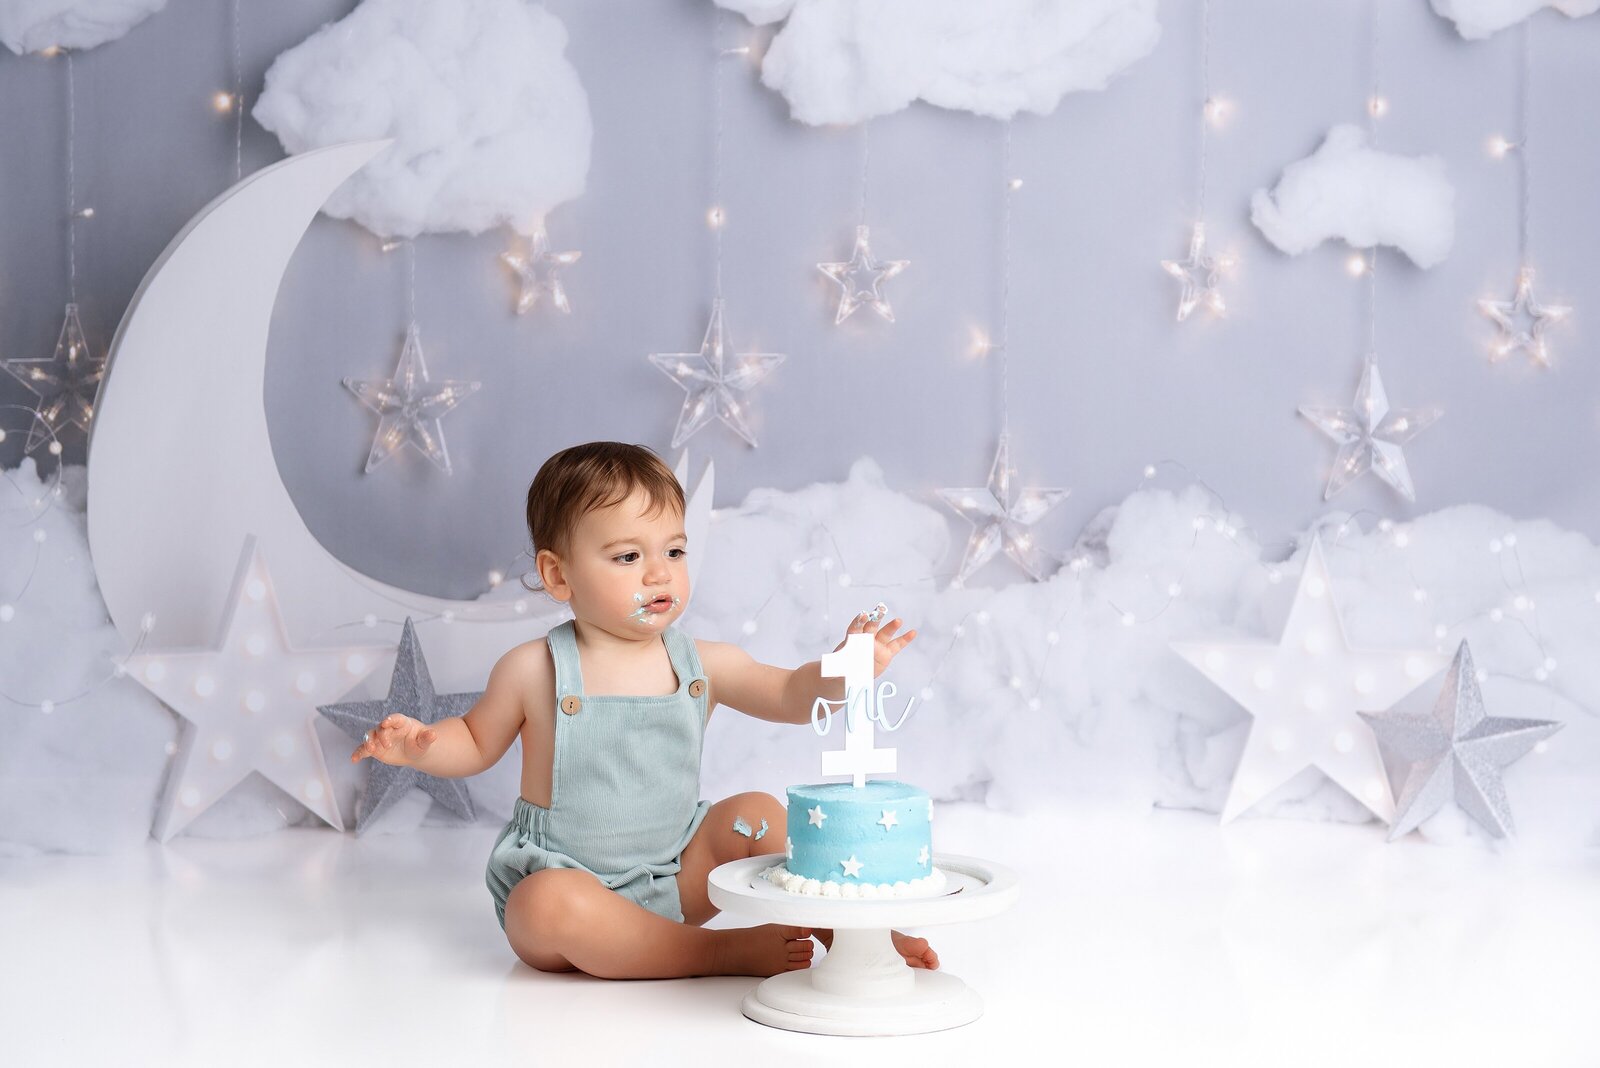 Twinkle twinkle little star cake smash photoshoot in West Palm Beach with little boy and his blue cake with a one on it.